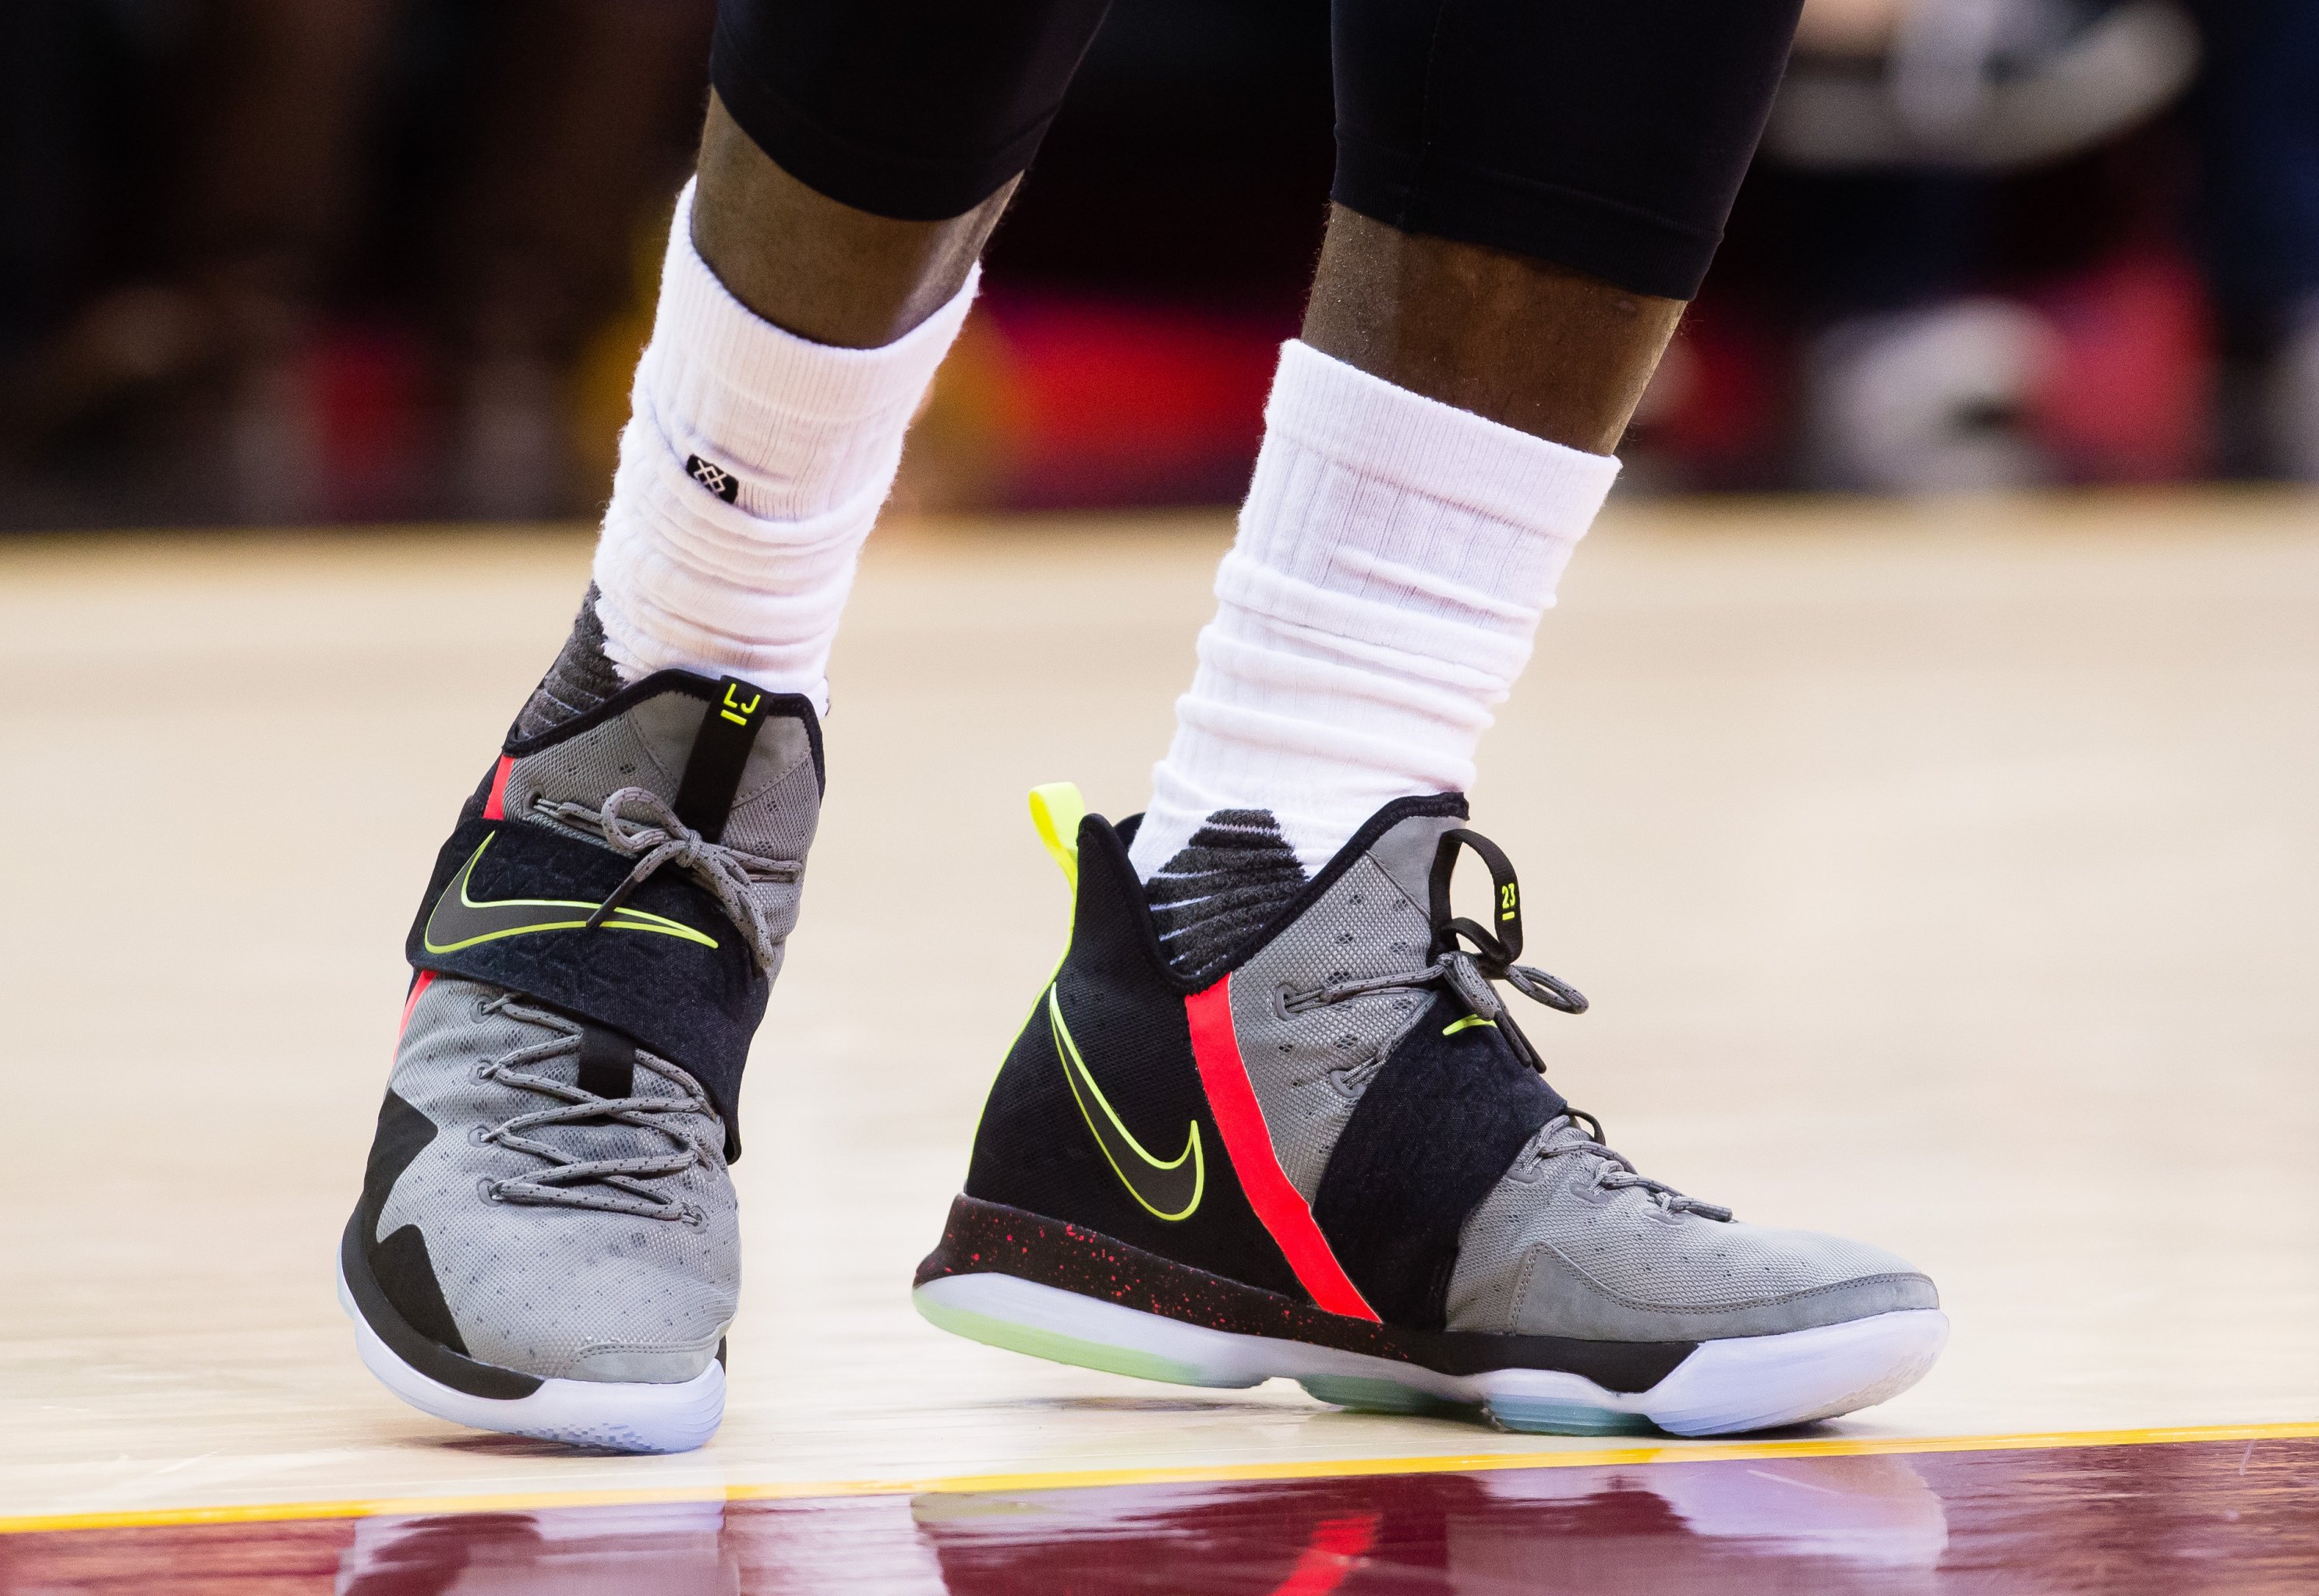 Which athlete wears the most Nike swooshes?